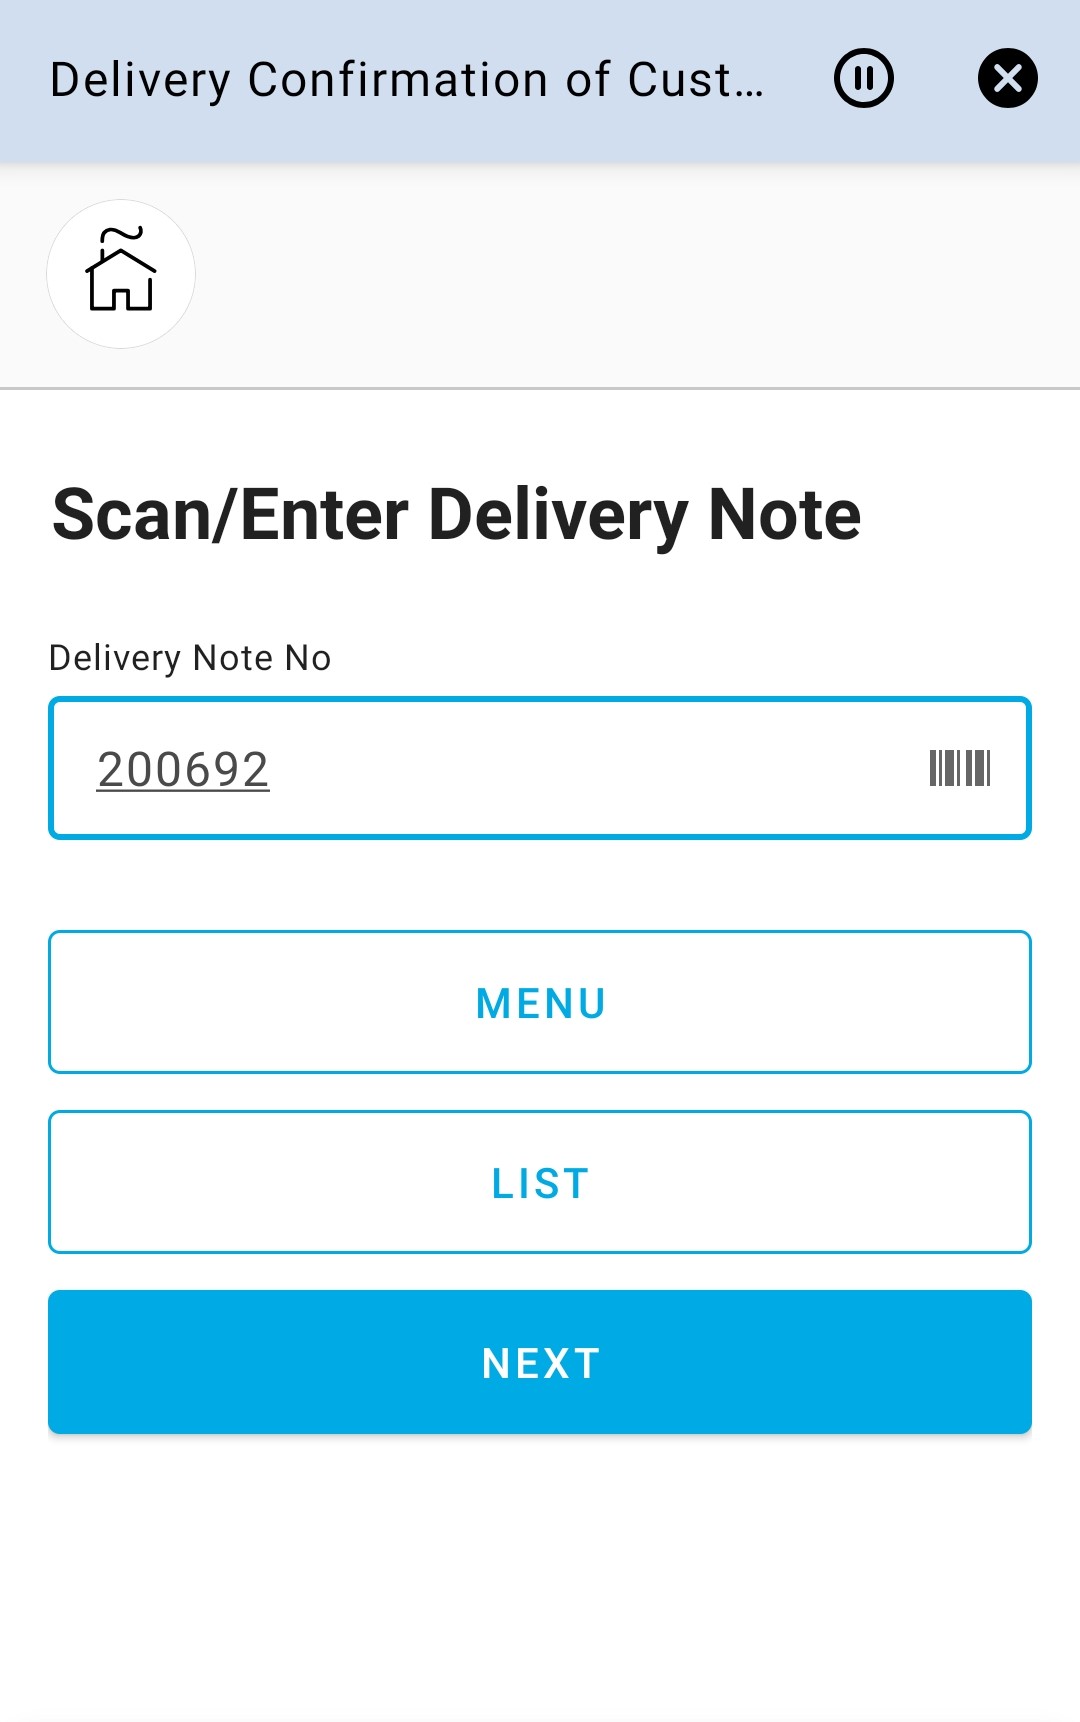 Enter Delivery Note